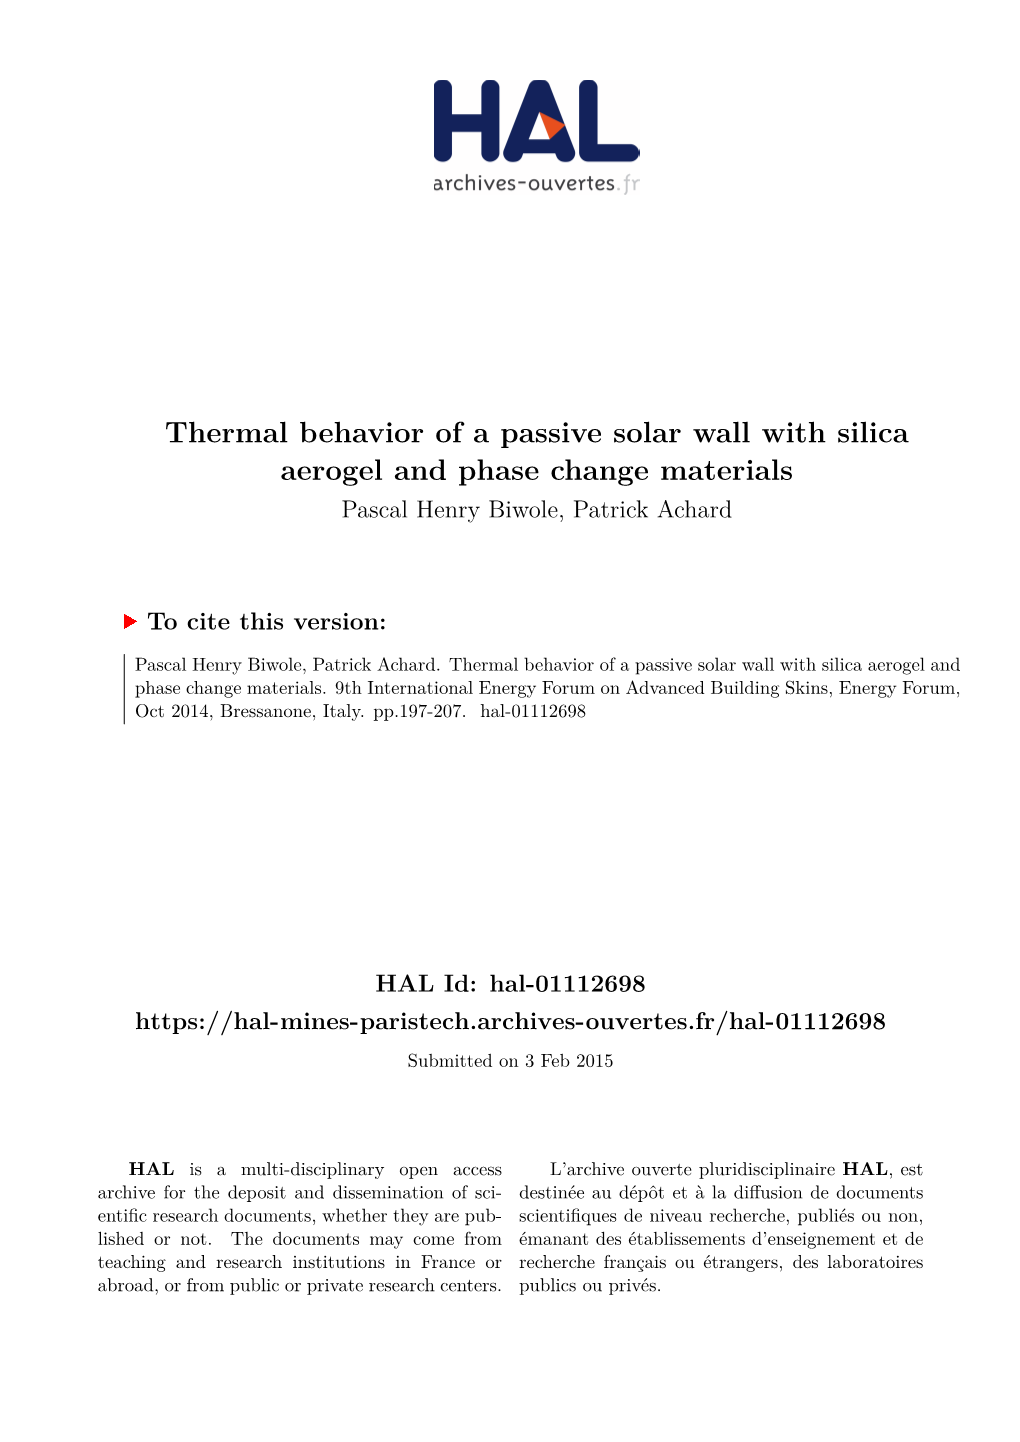 Thermal Behavior of a Passive Solar Wall with Silica Aerogel and Phase Change Materials Pascal Henry Biwole, Patrick Achard